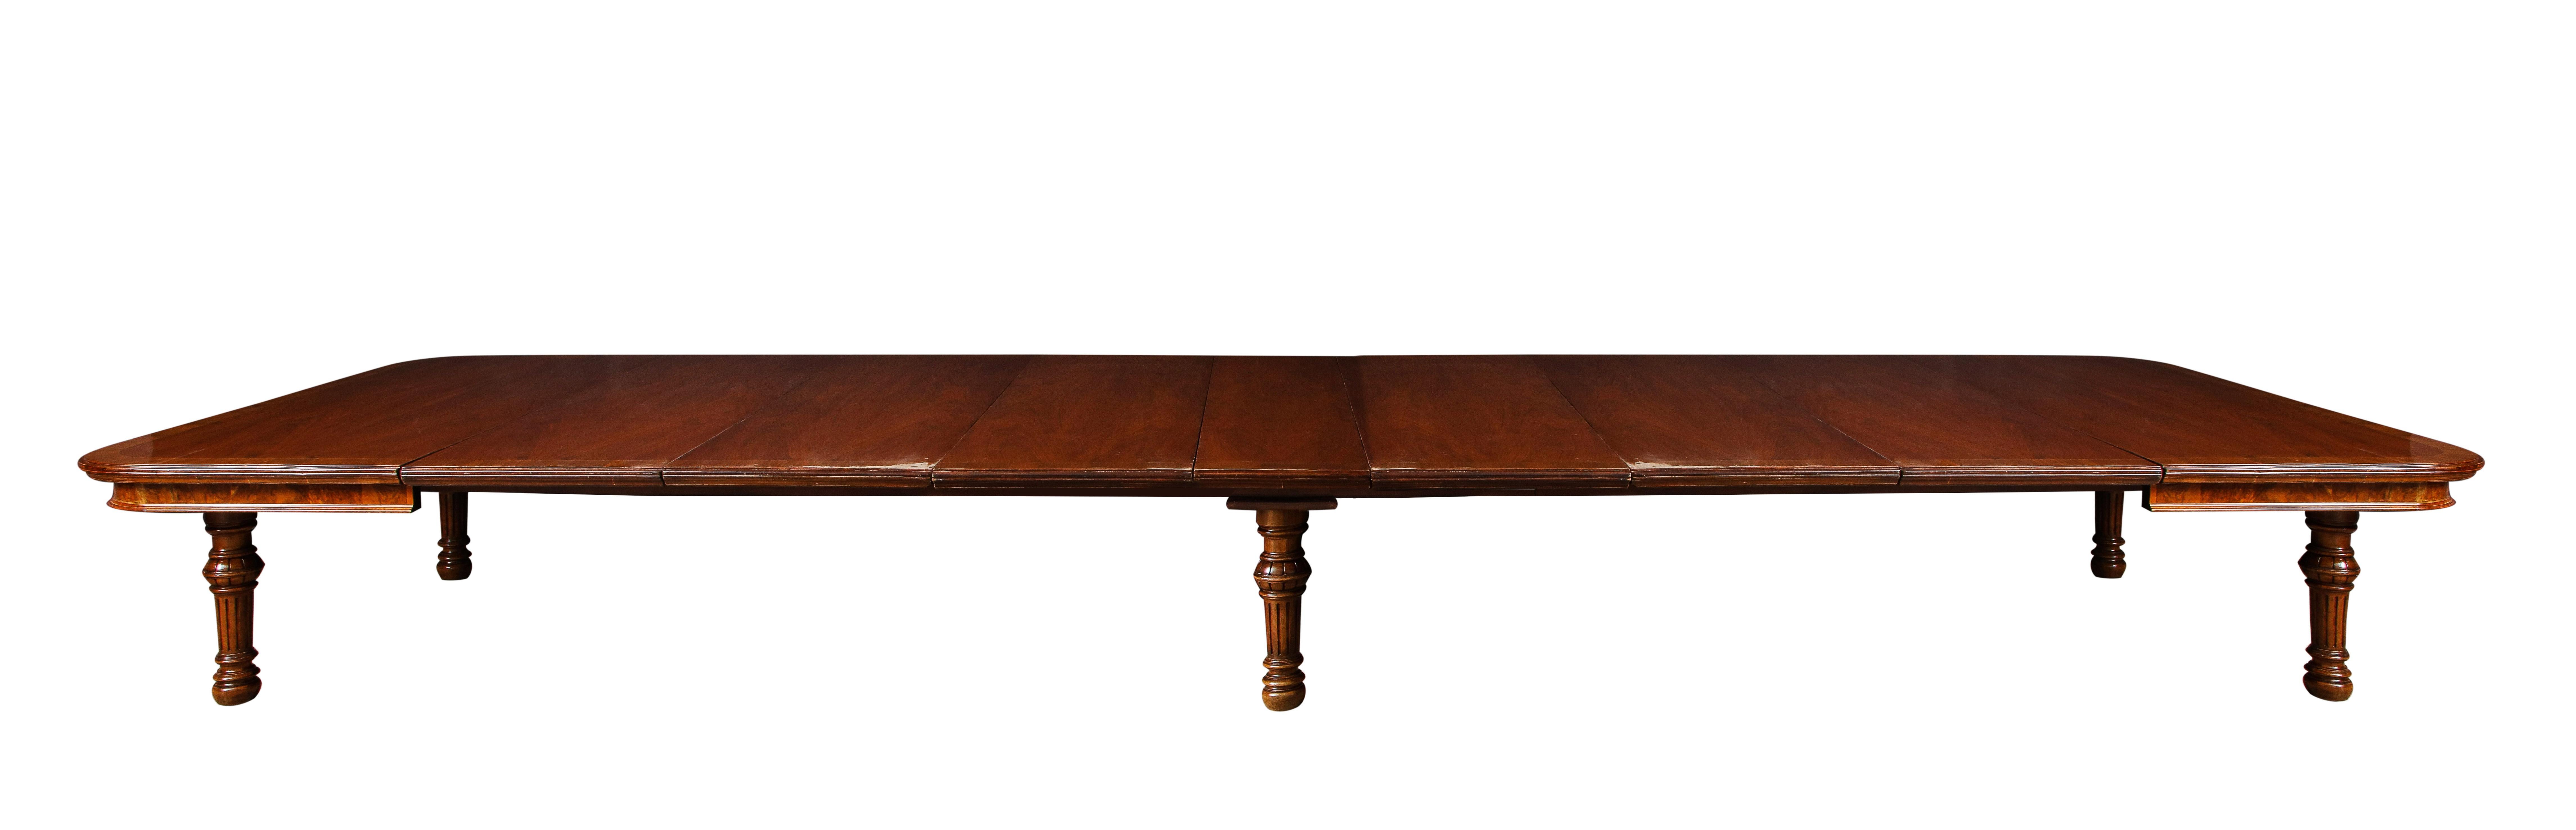 Monumental banded walnut dining table with banded edge on six turned and fluted legs. The table is 6' square when closed, and then opening to 20' with seven leaves. Stamped on each outside rail: GILLOWS #9046
Measures: 6' x 6' closed.